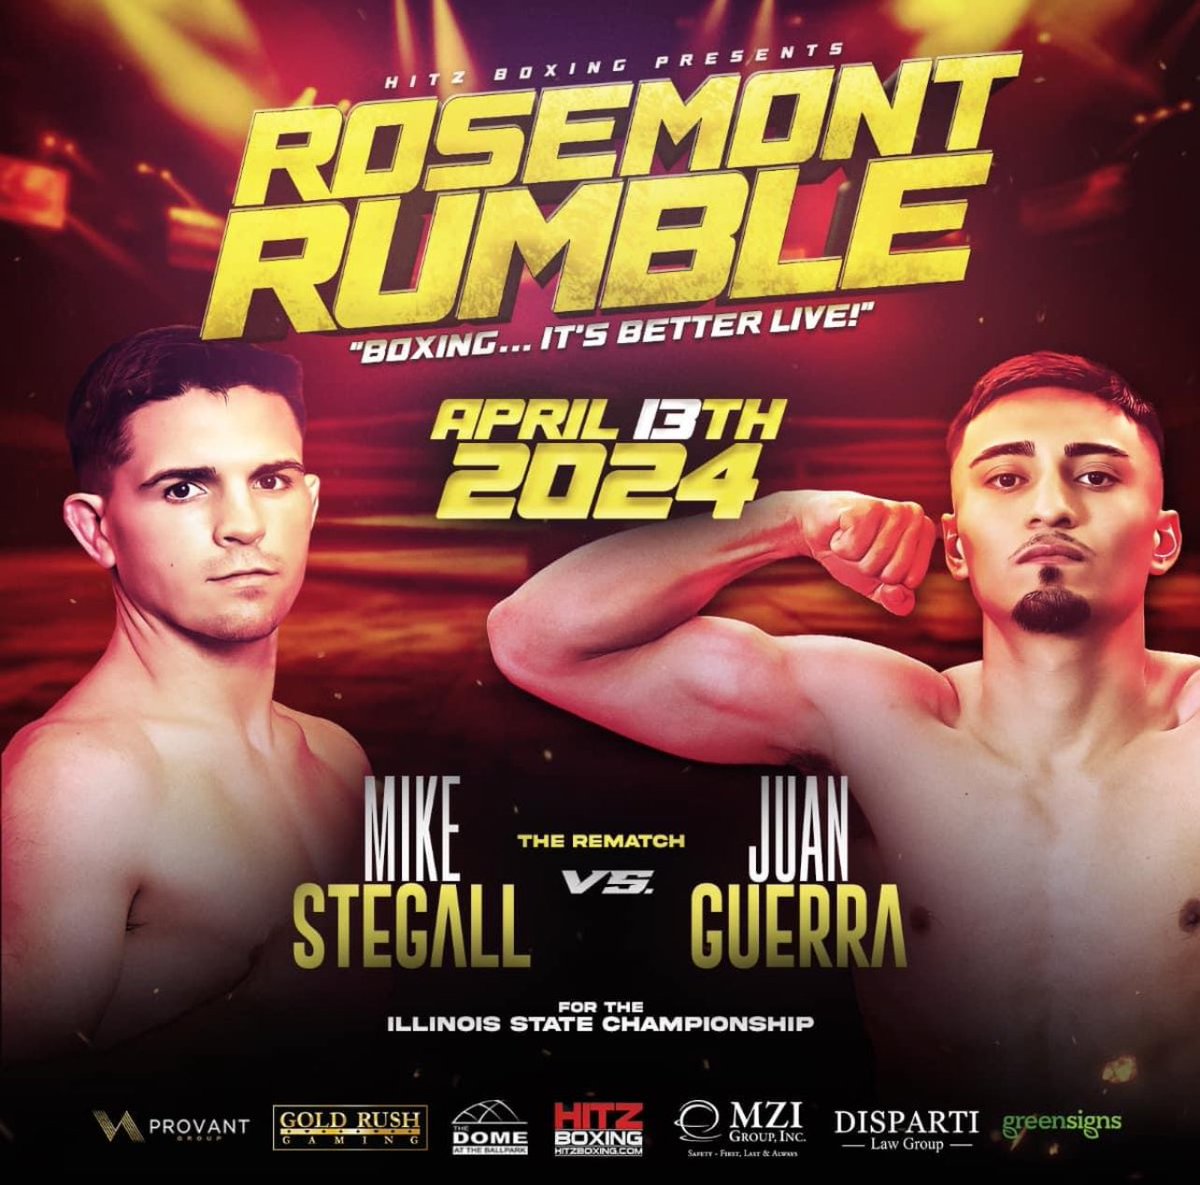 ‼️ IT’s OFFICIAL ‼️

Mike Stegall vs Juan Guerra for the Illinois State Title 👀 #RickRamosBoxing #HITZBoxing

⭐️: @MikeStegall6 / @HitzBoxing 
📍: @pkwybanksports (The Dome) 
🗓️: Saturday, April 13th 
🎟️: @RRBoxingGym 

#RickRamosBoxingGym #Chicago #ChicagoBoxing #Boxing